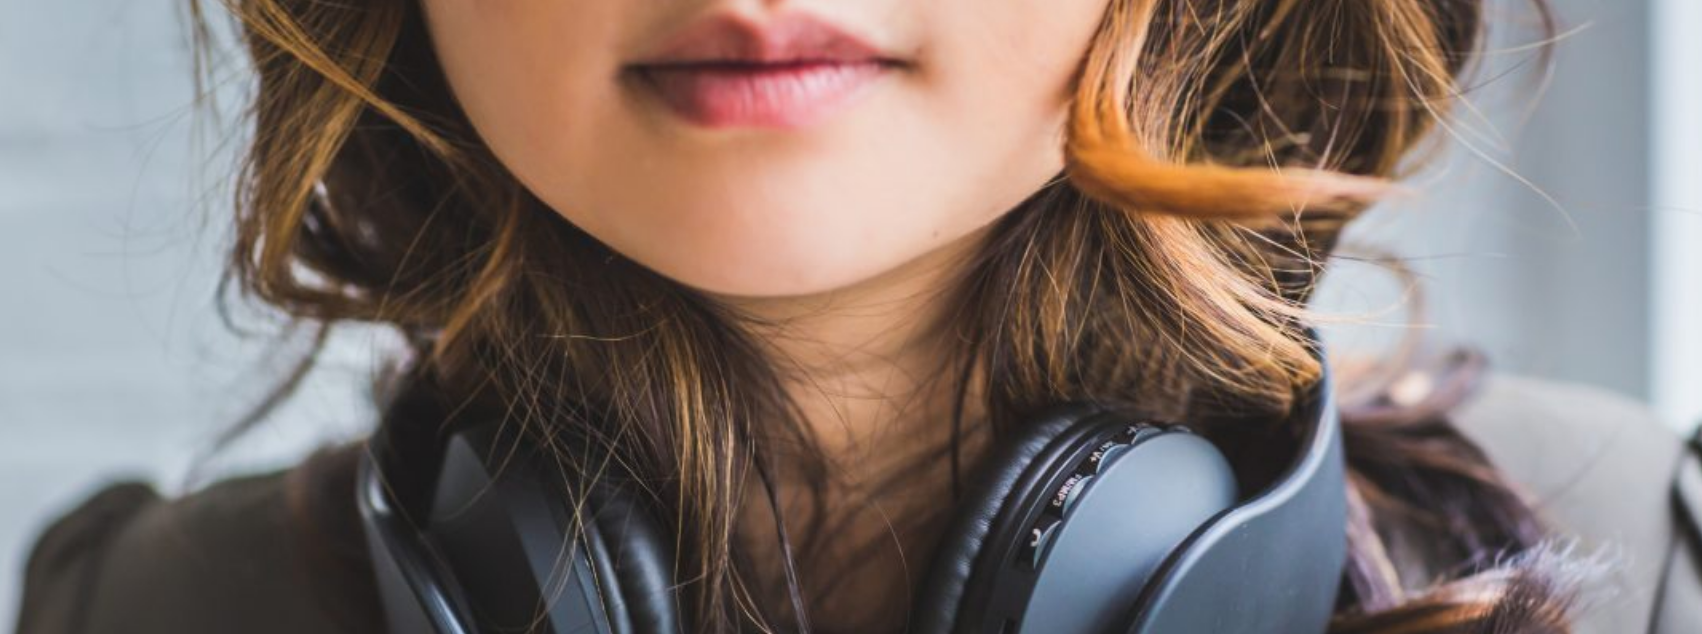 Study Says We Find Comfort in Listening to the Same Song Repeatedly